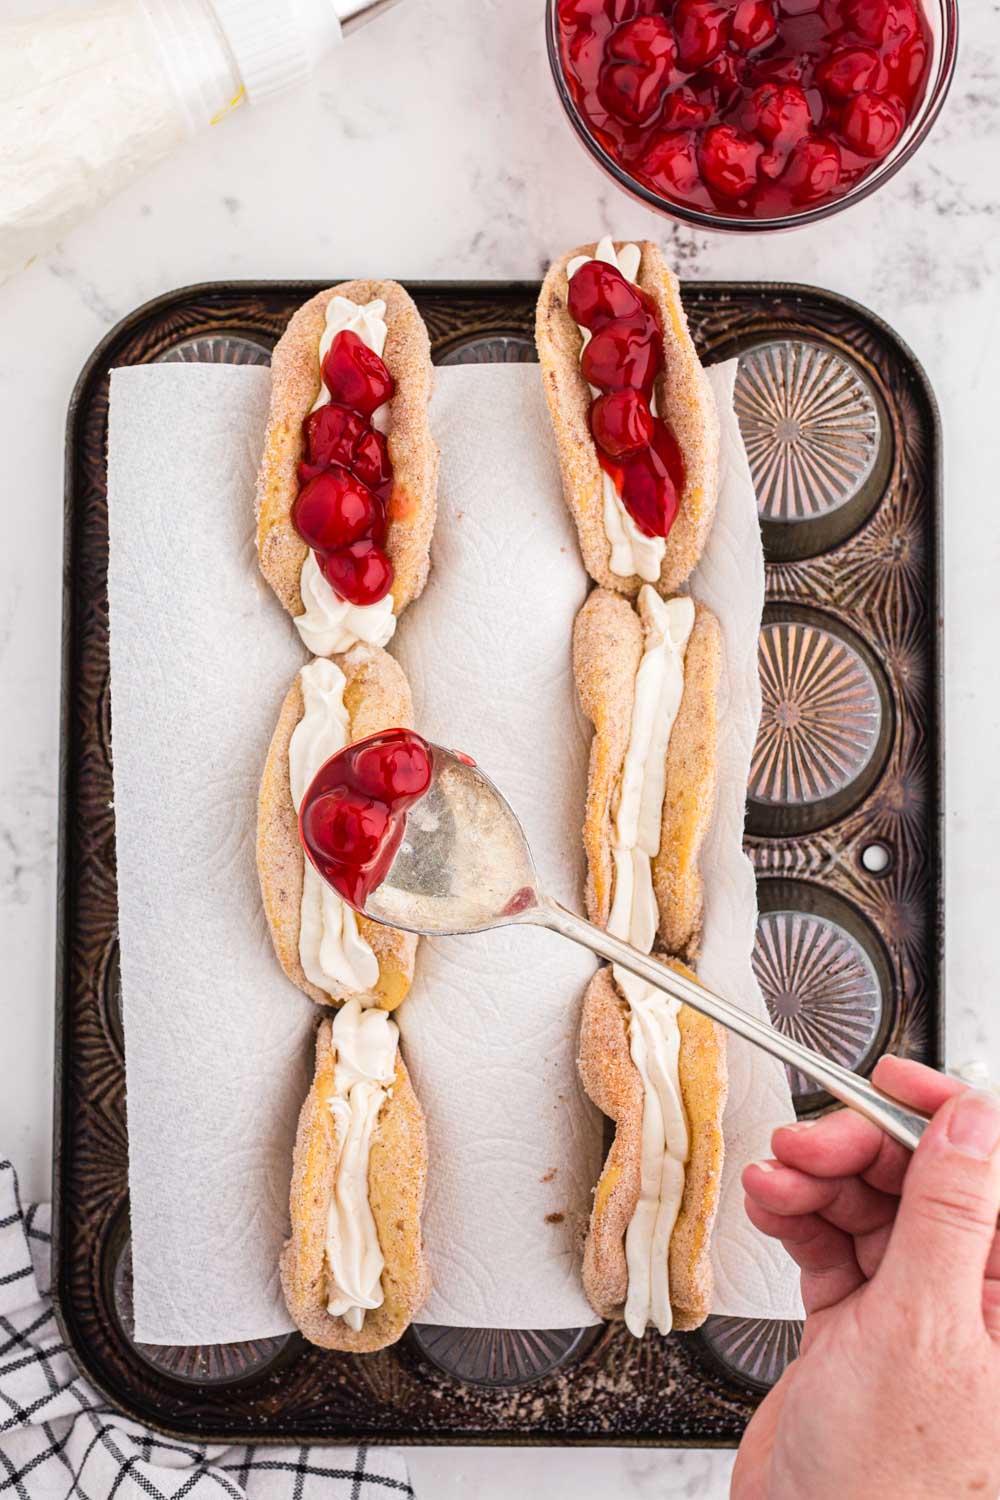 Spoon topping cream cheese filled fried tacos with cherry pie filling using the back of a muffin tray with parchment paper, bowl of cherry pie filling, checked linen, on a marble countertop